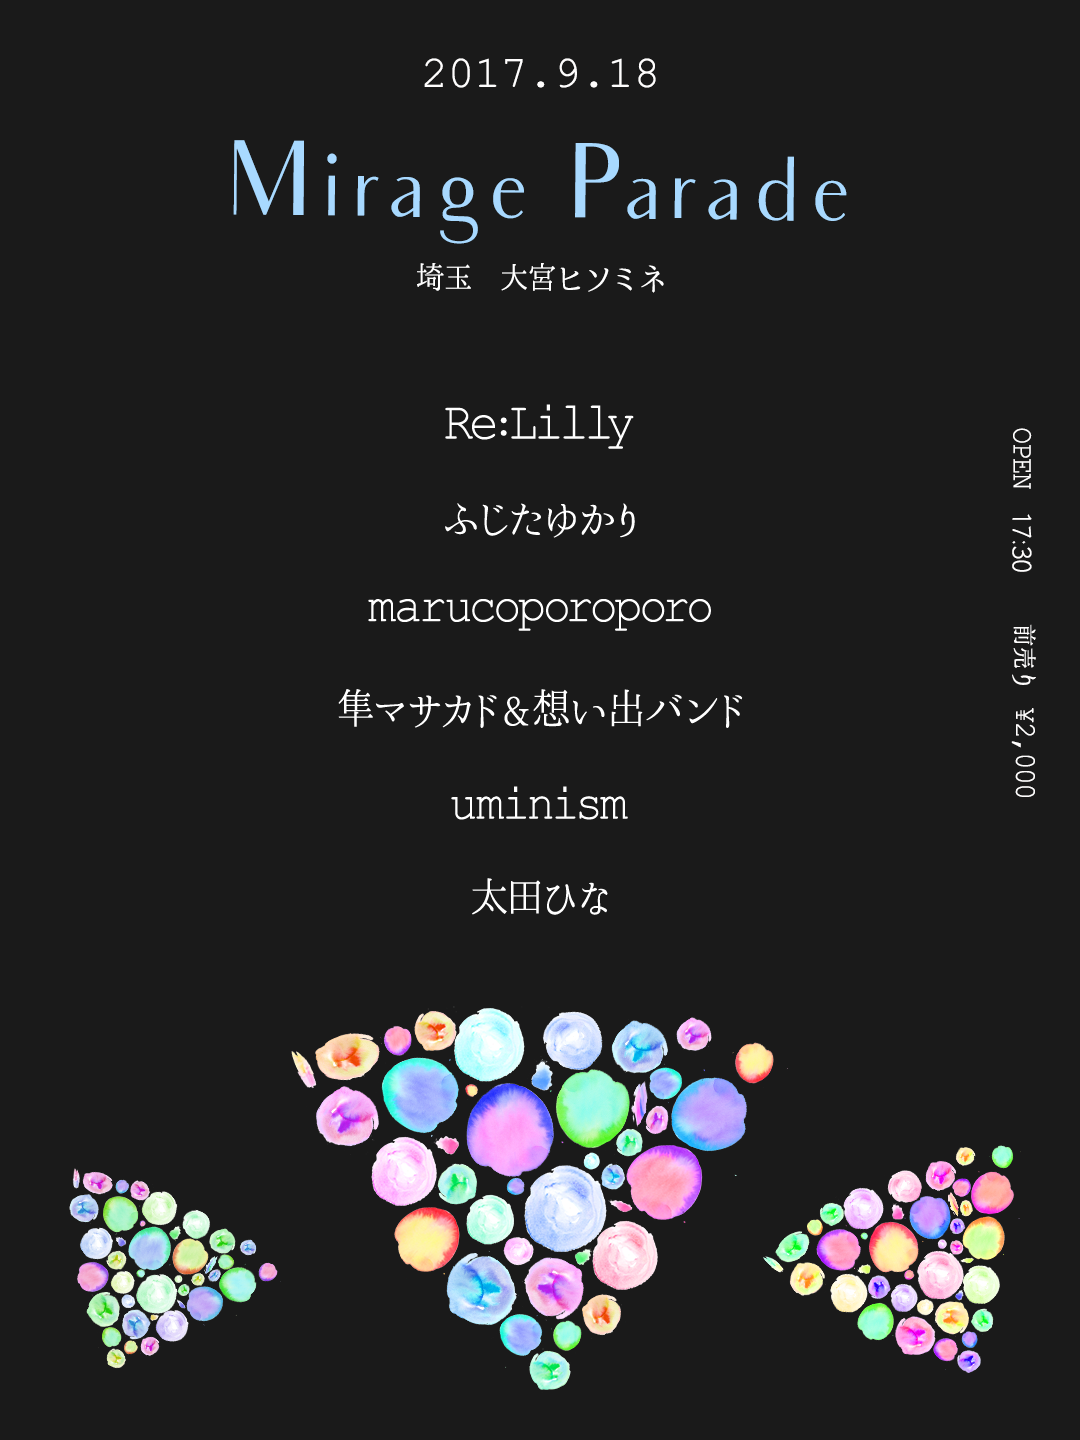 Re:Lilly presents『mirage parade』